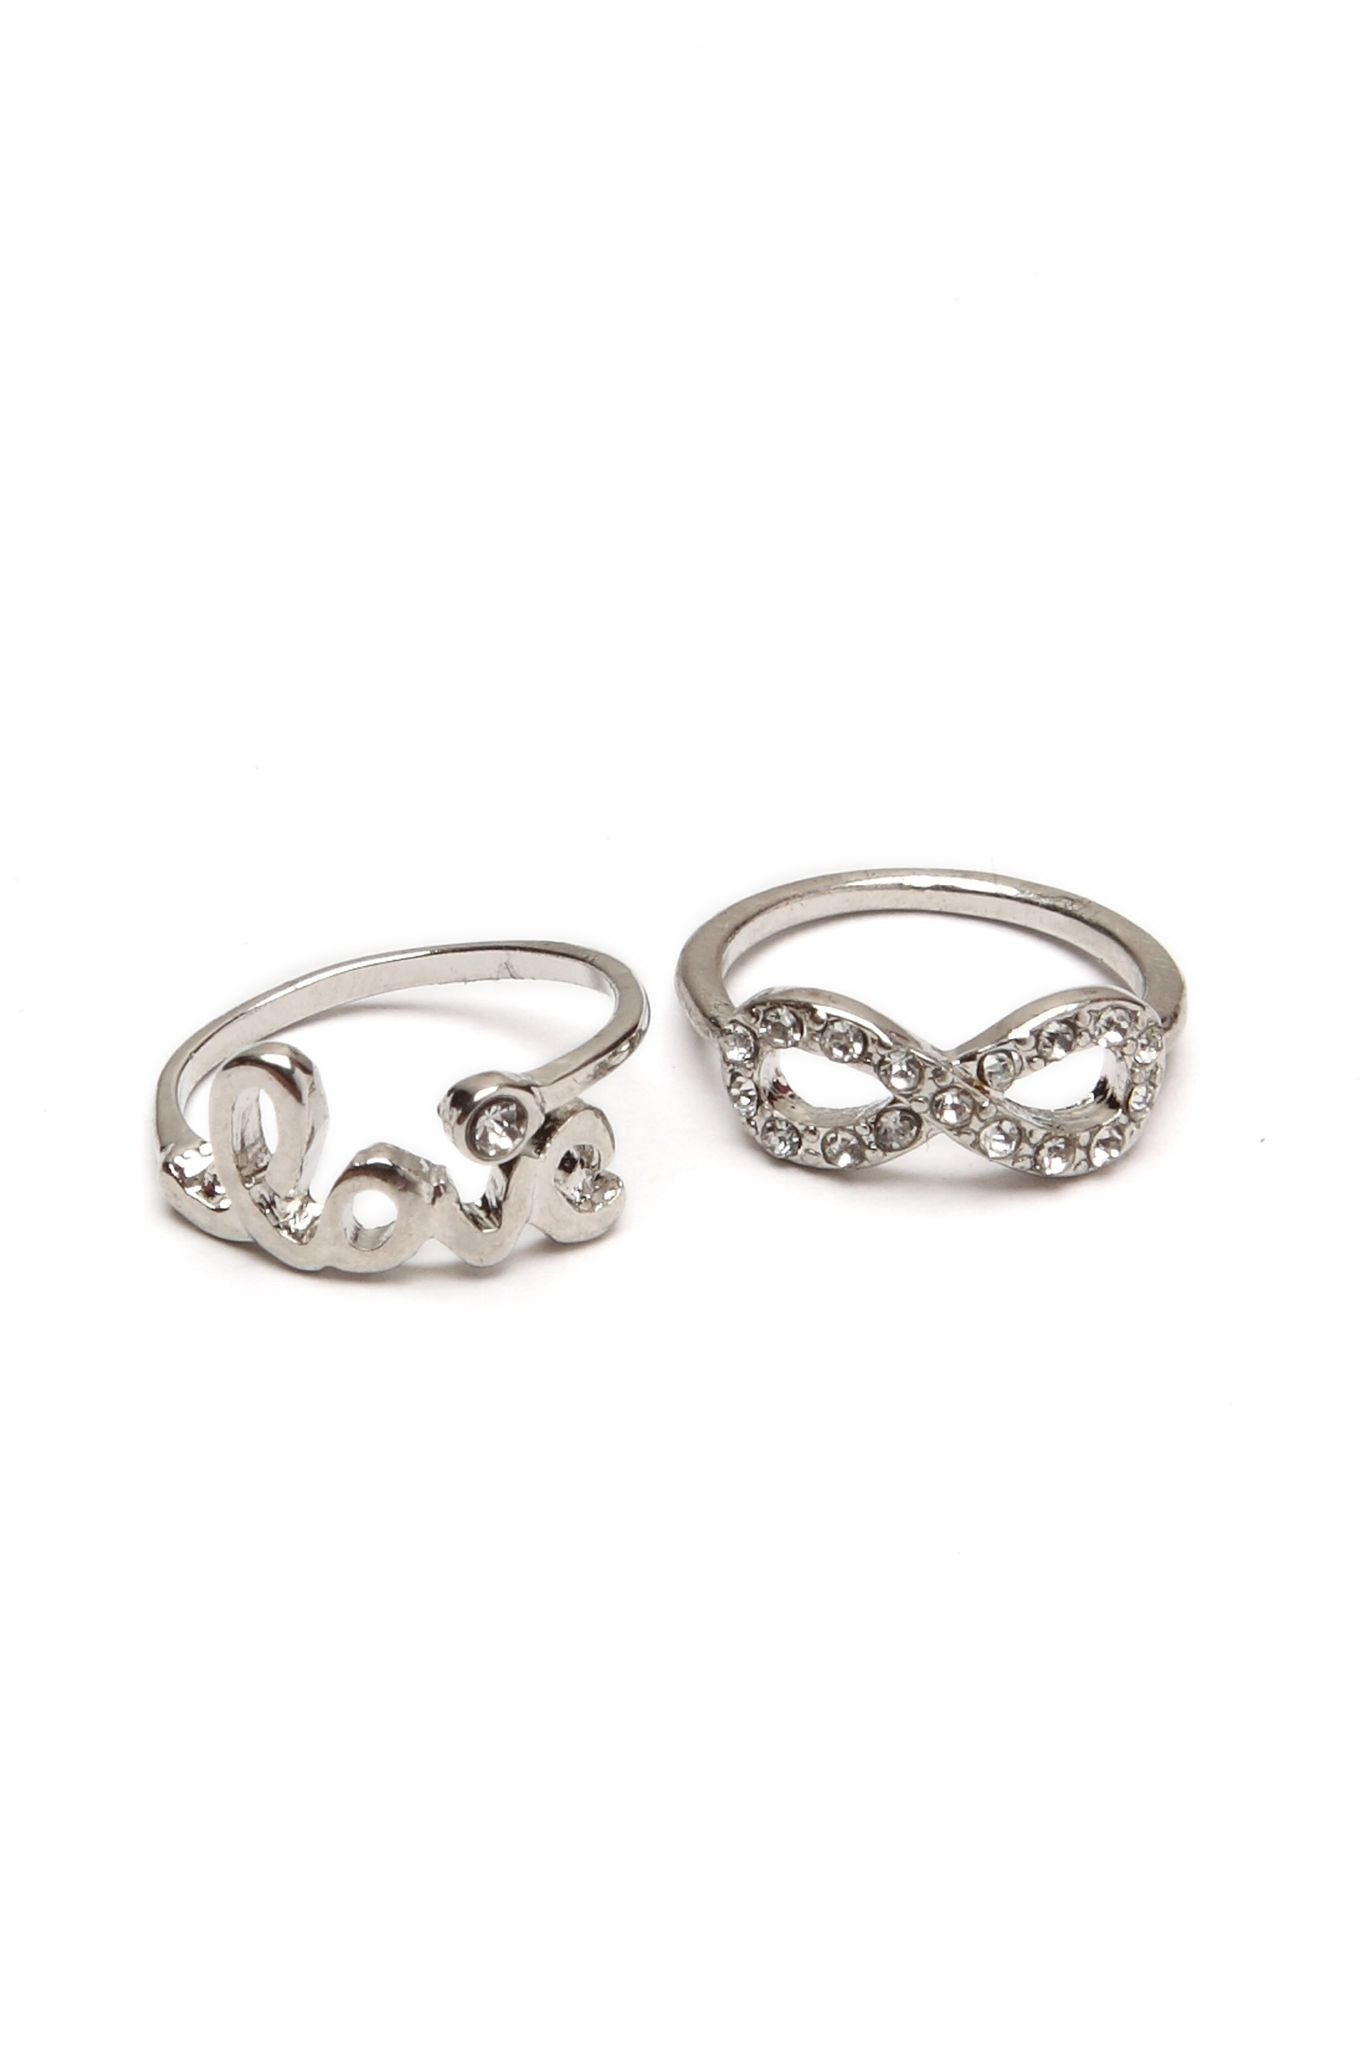 http://www.missflurrty.com/collections/new-arrivals/products/infinite-love-midi-ring